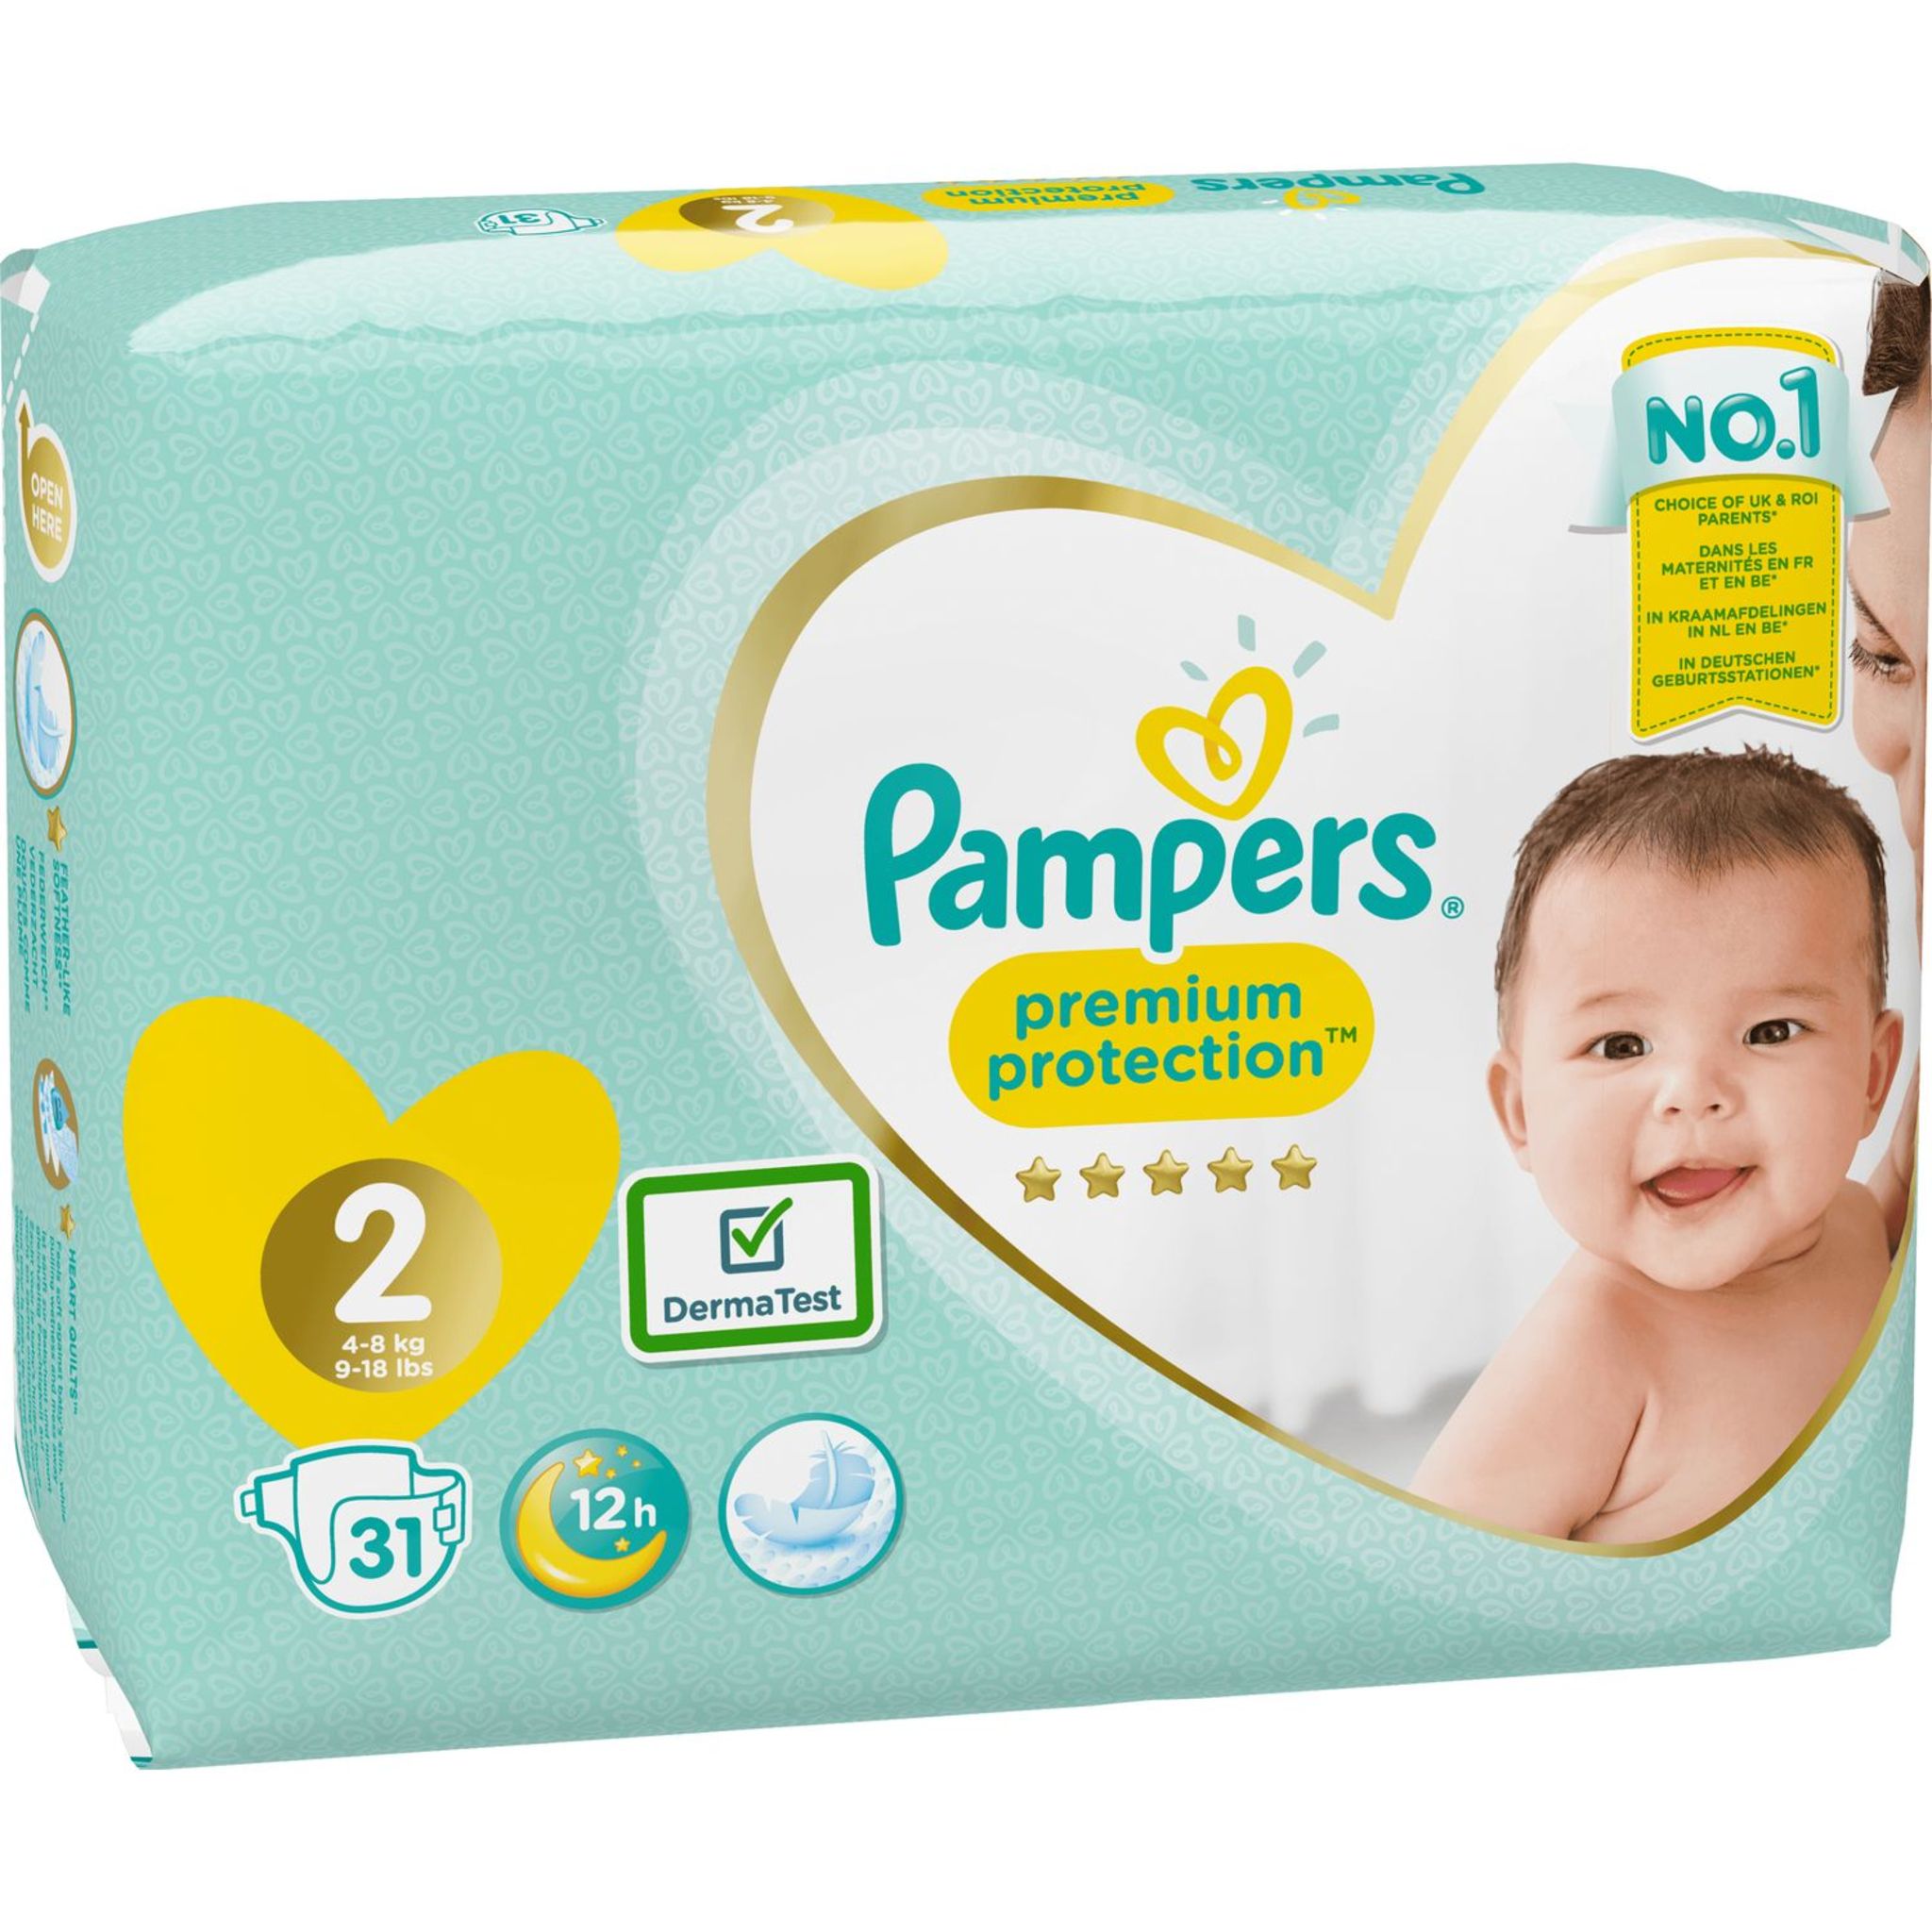 PAMPERS Pampers Premium protection couches taille 2 (4-8 kg) x31 31  couches pas cher 